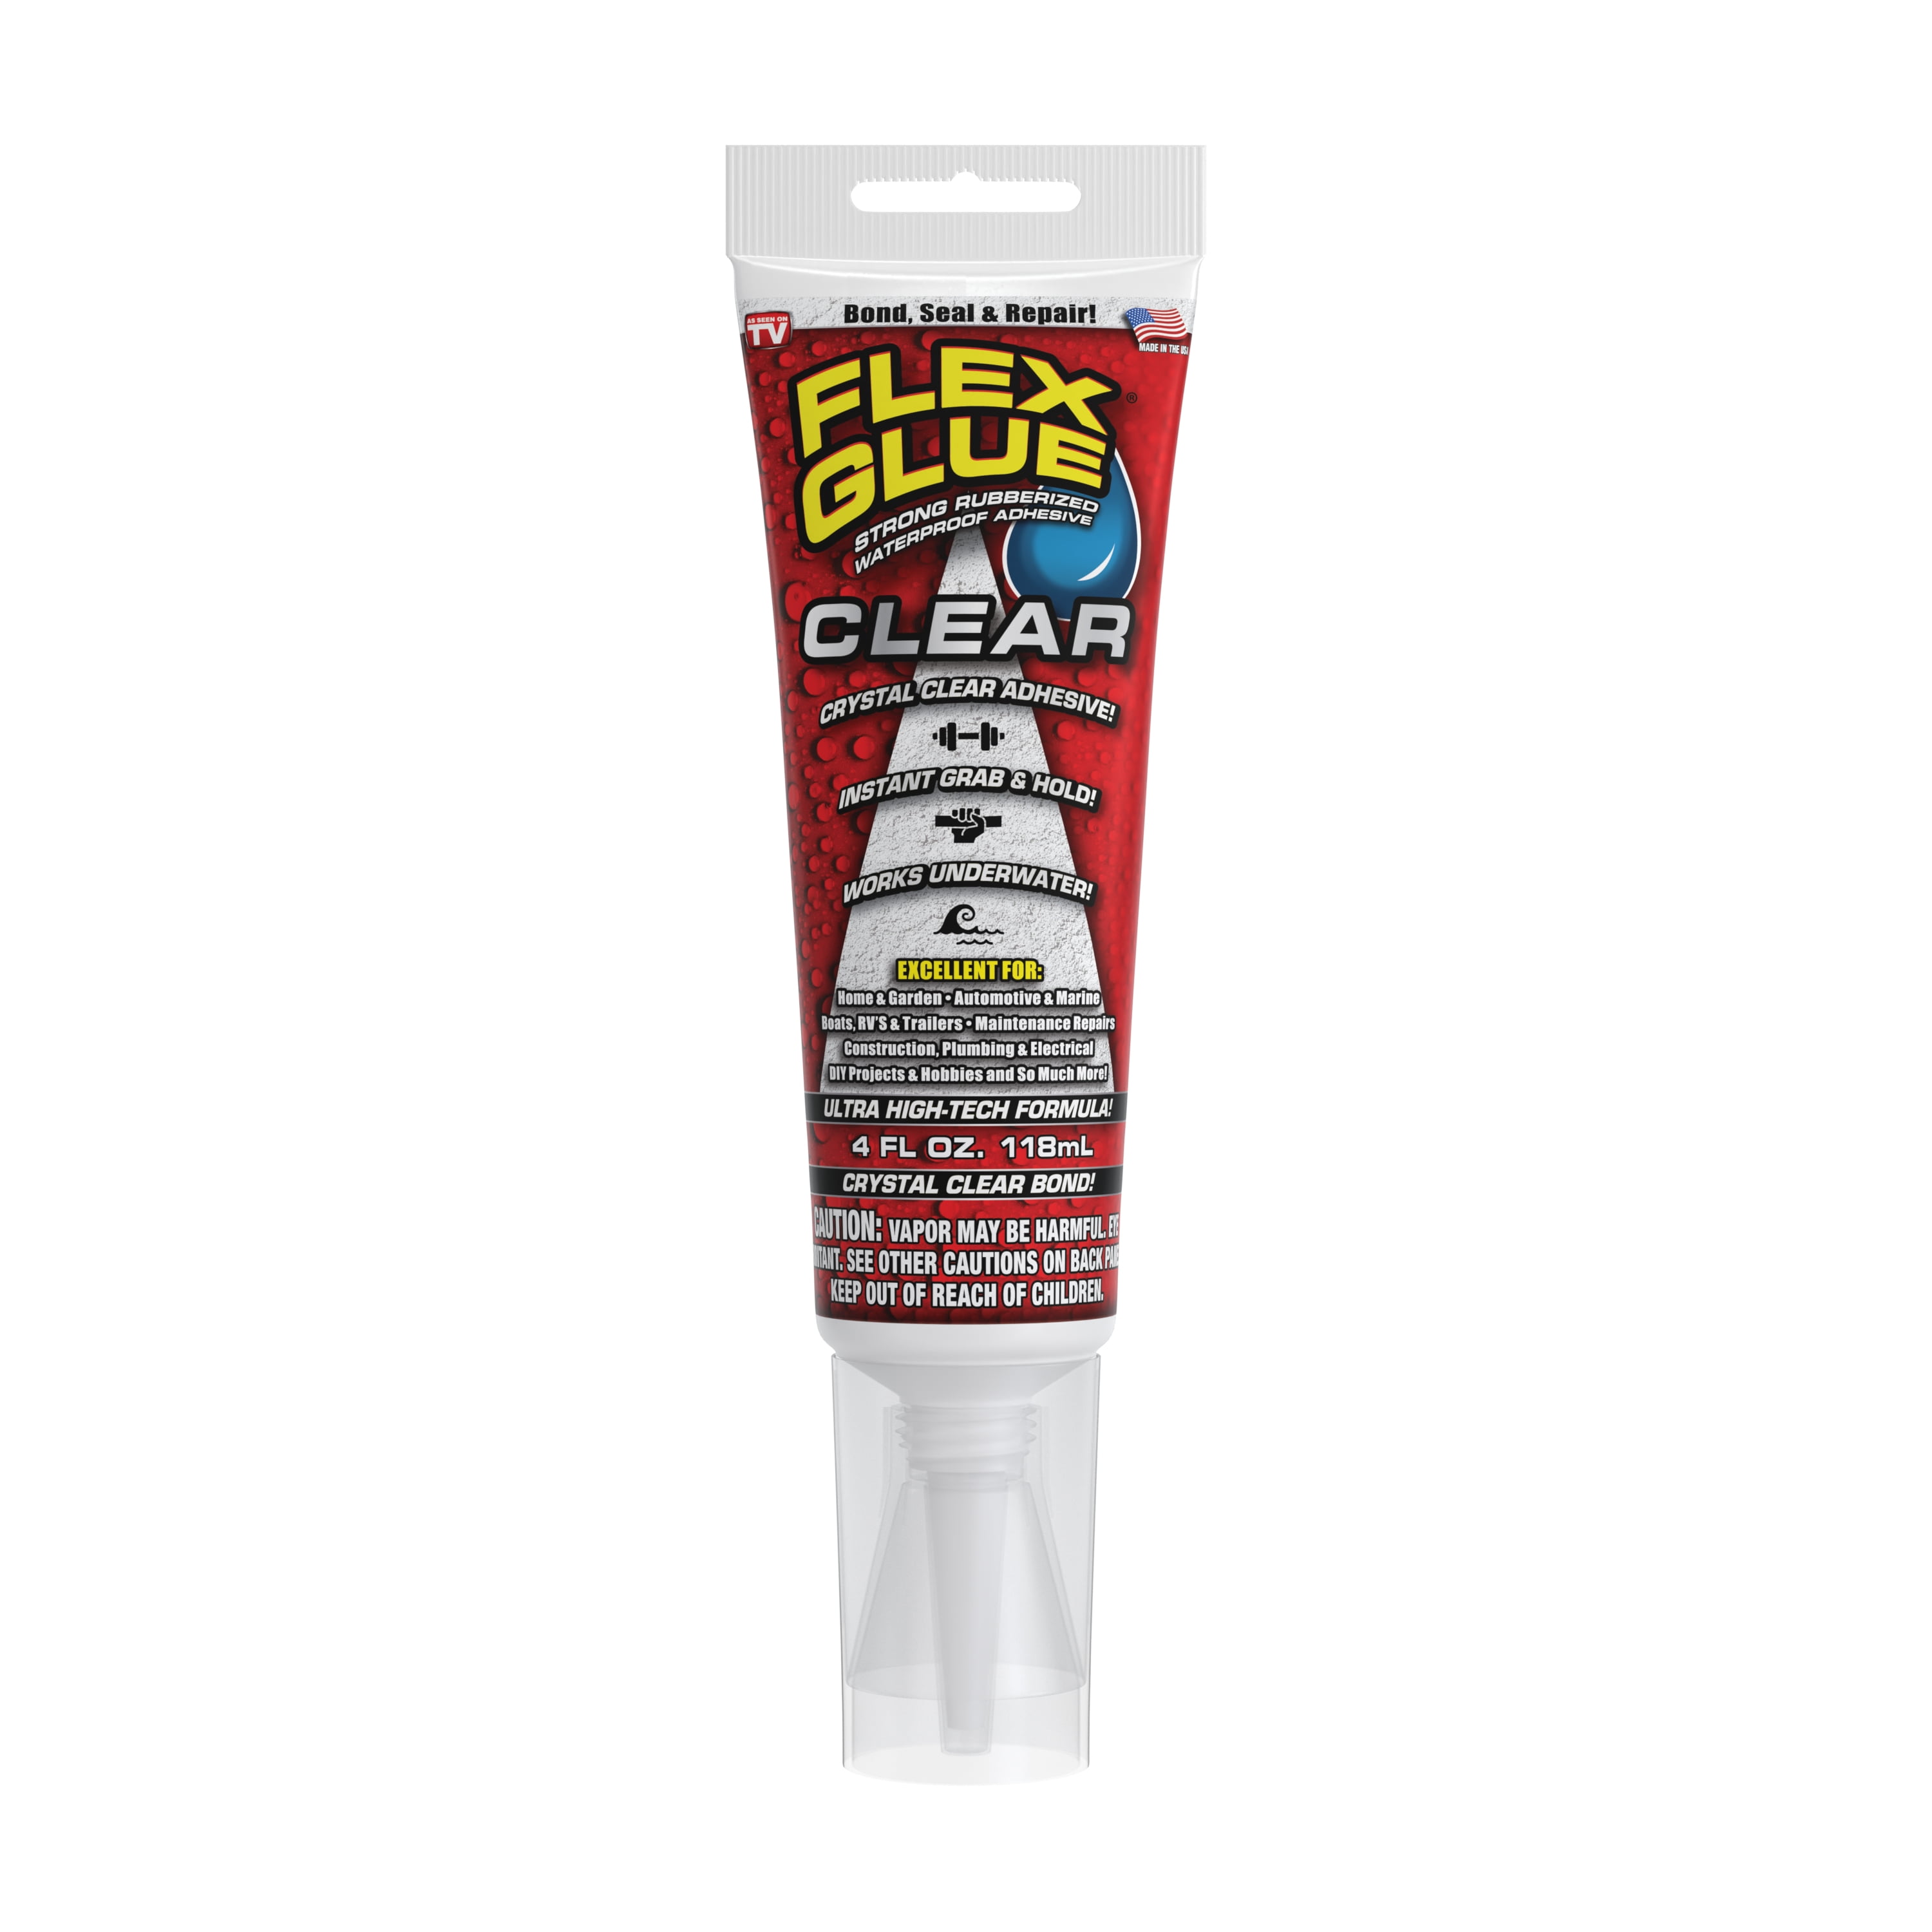 6004382 4 Oz Crystal Clear Rubberized Waterproof Adhesive